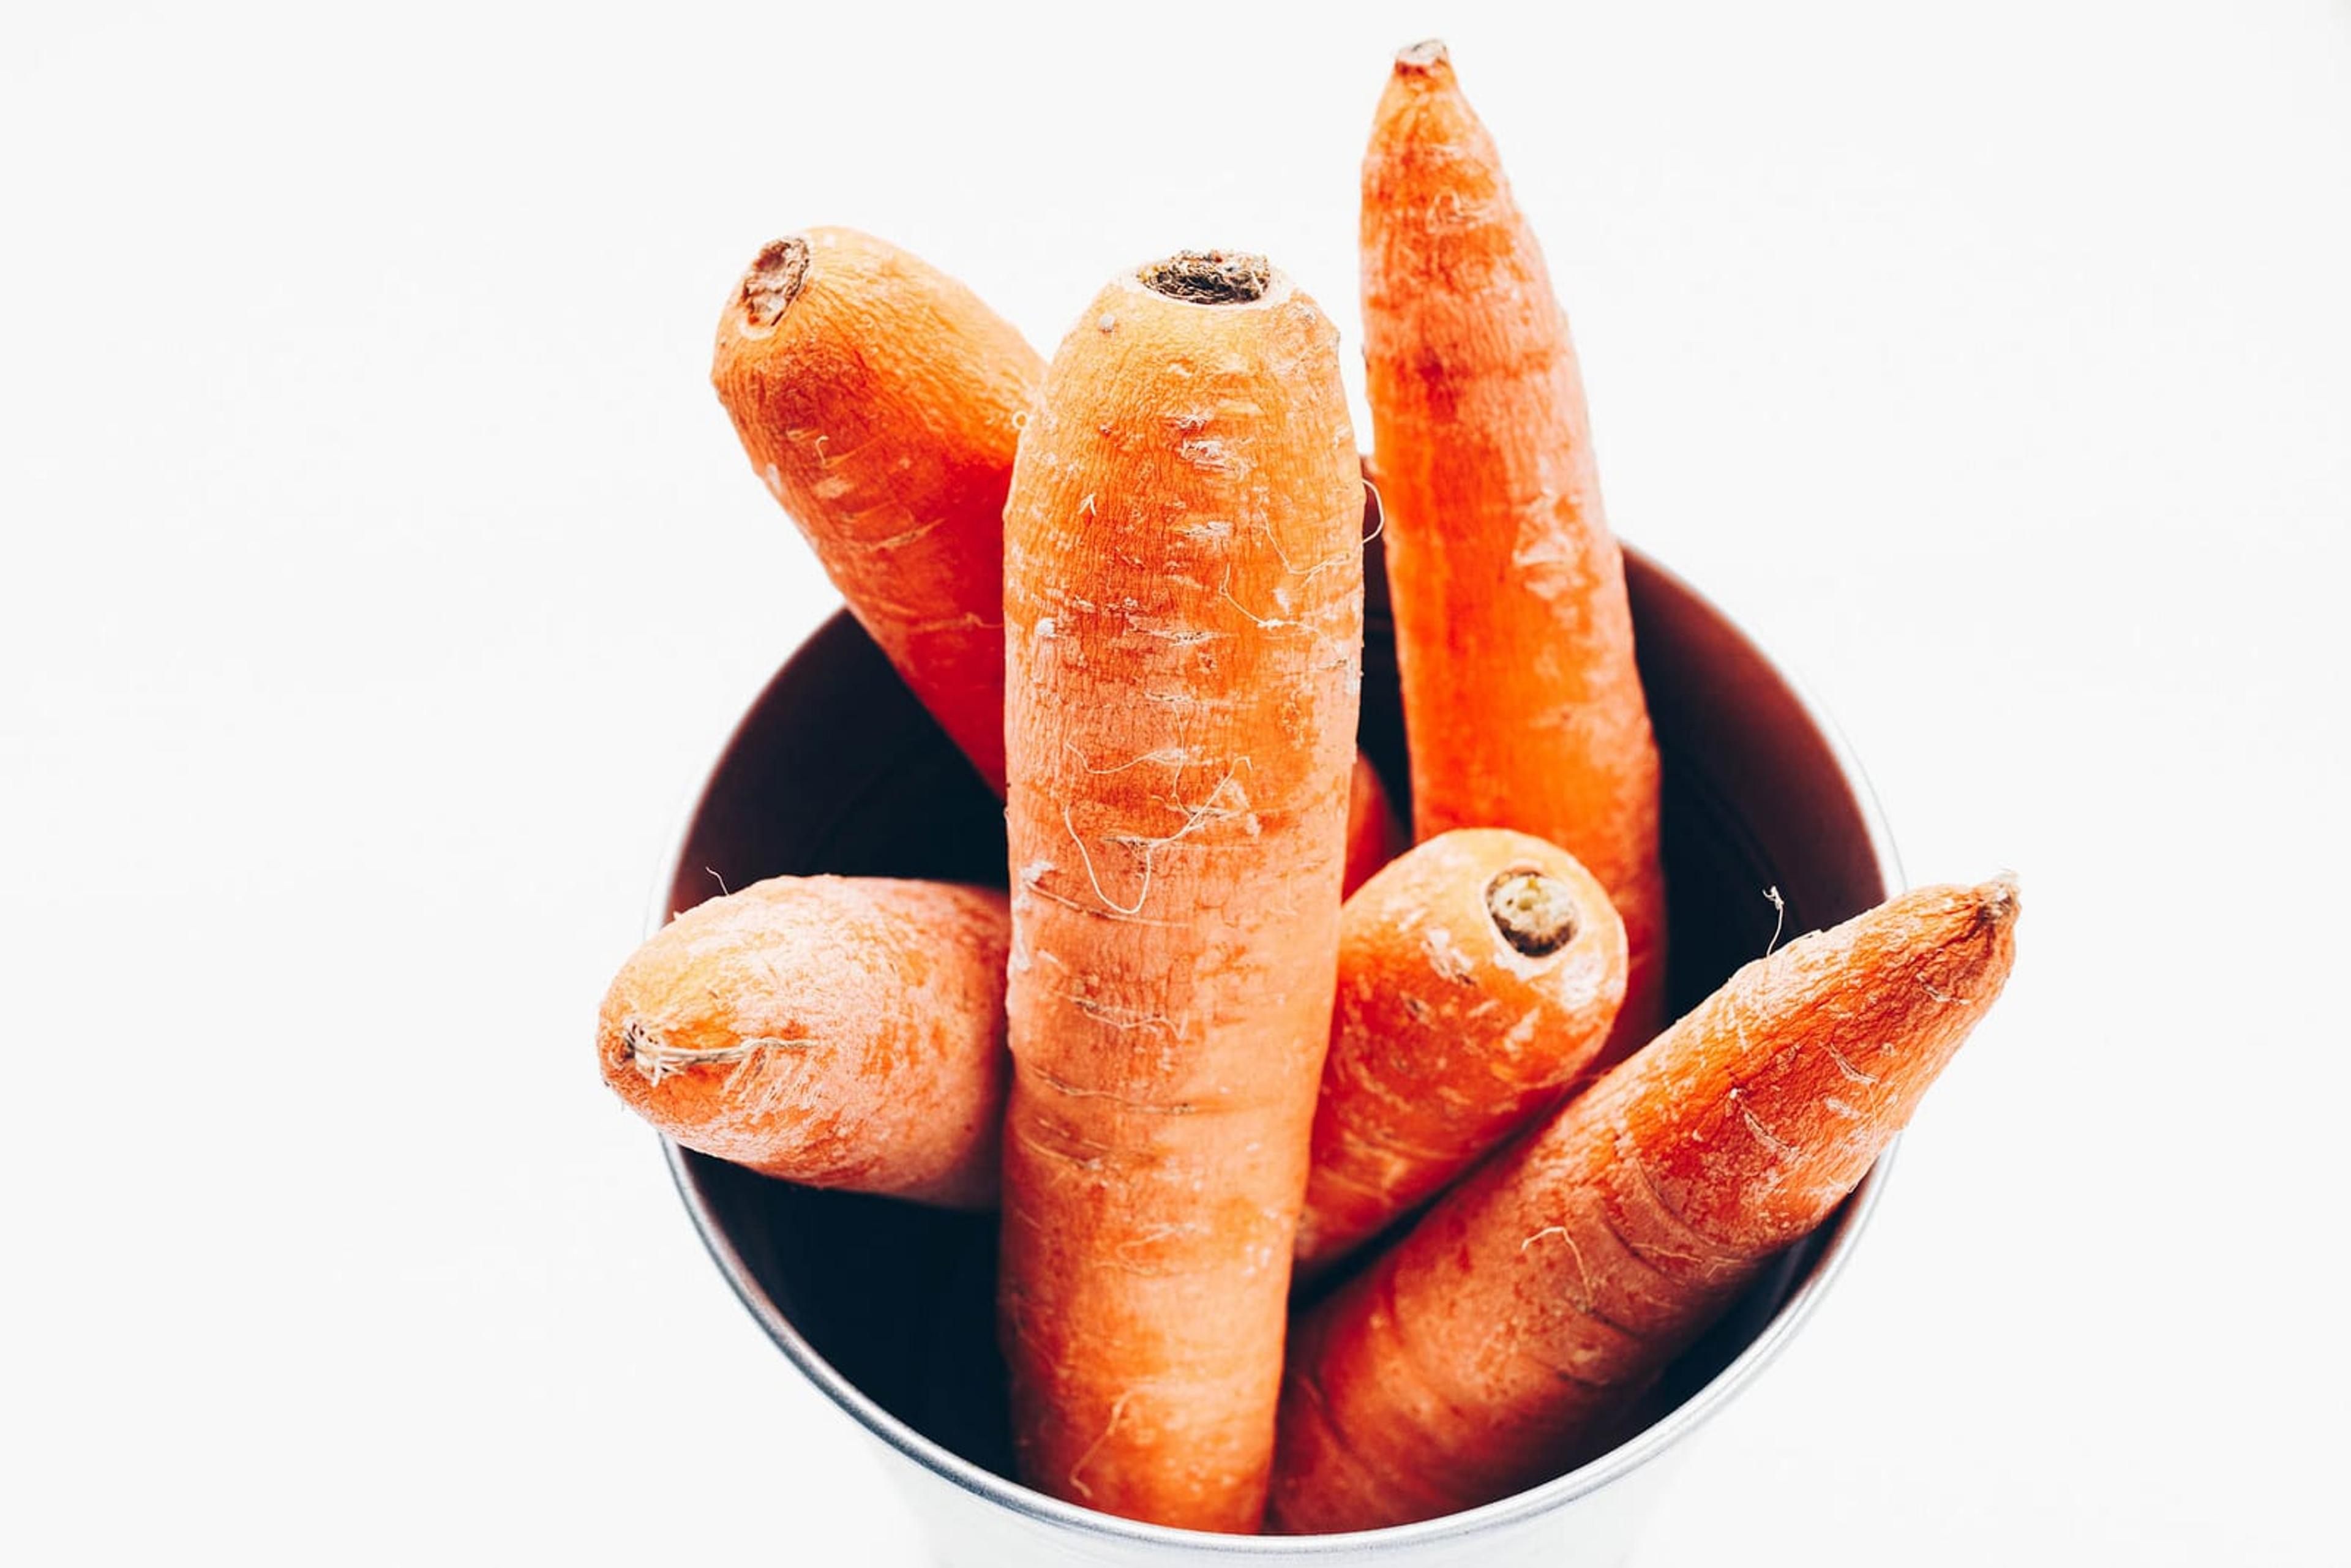 Image of whole carrots in bowl taken from above.